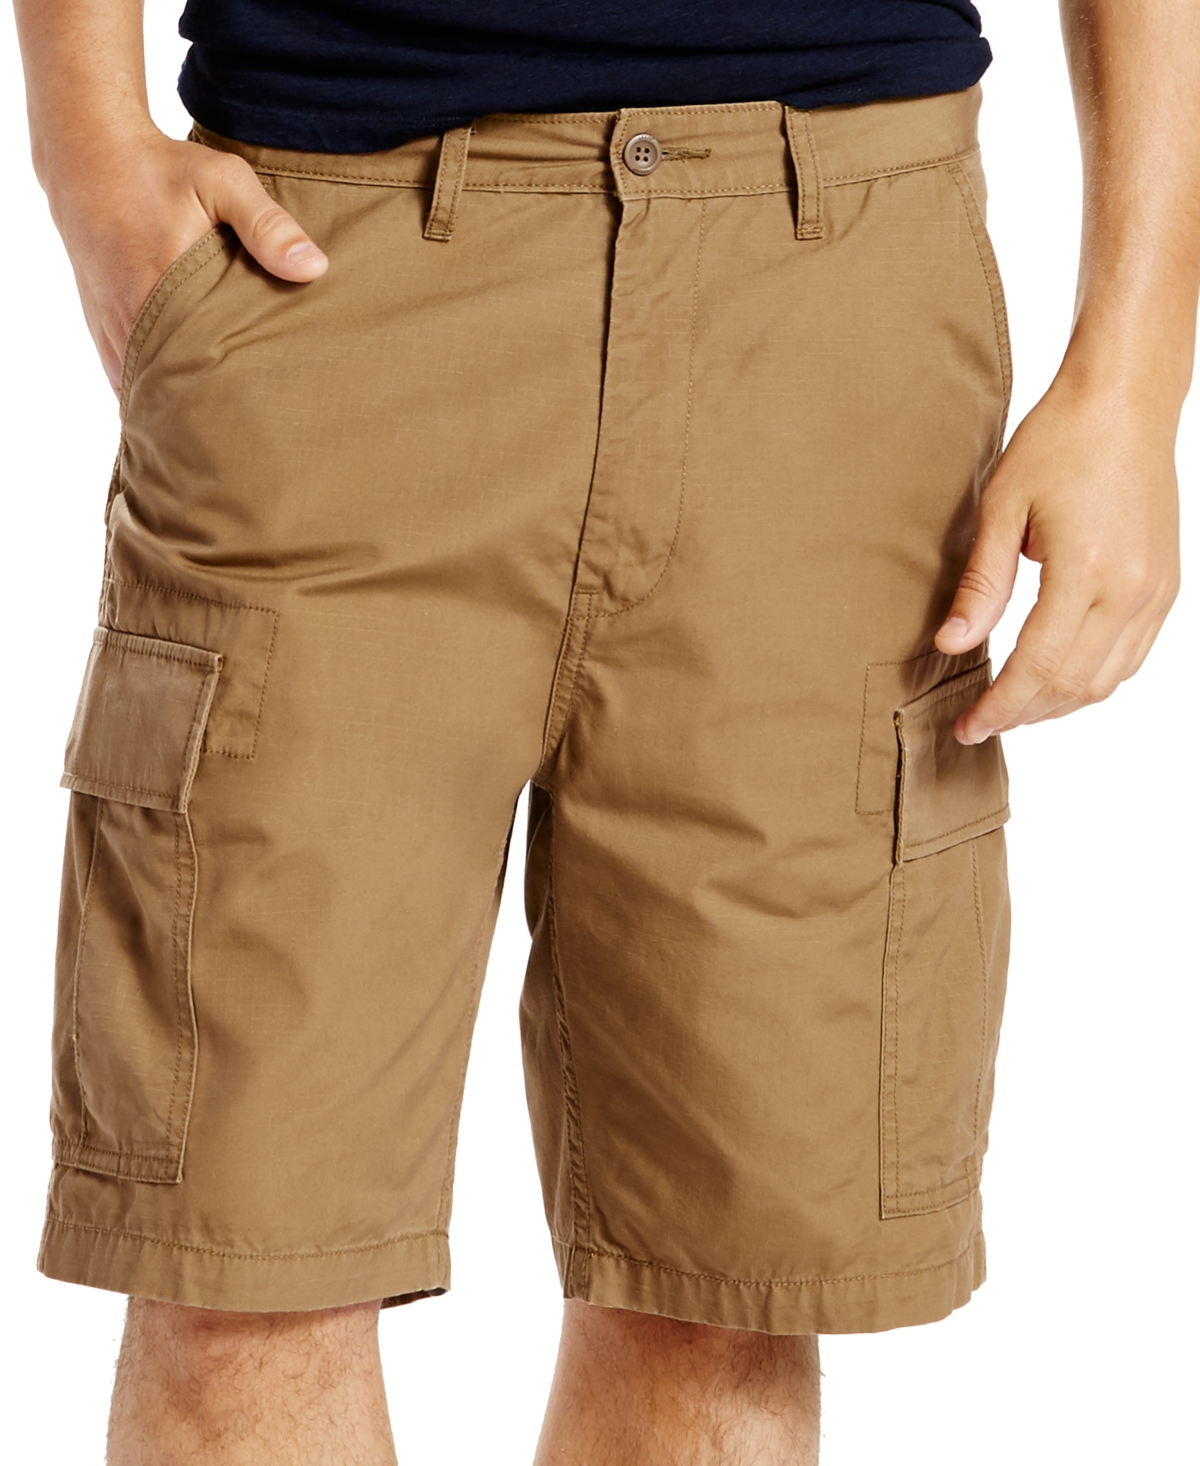 UPC 889319951032 product image for Levi's Men's Carrier Loose-Fit Cargo Shorts | upcitemdb.com